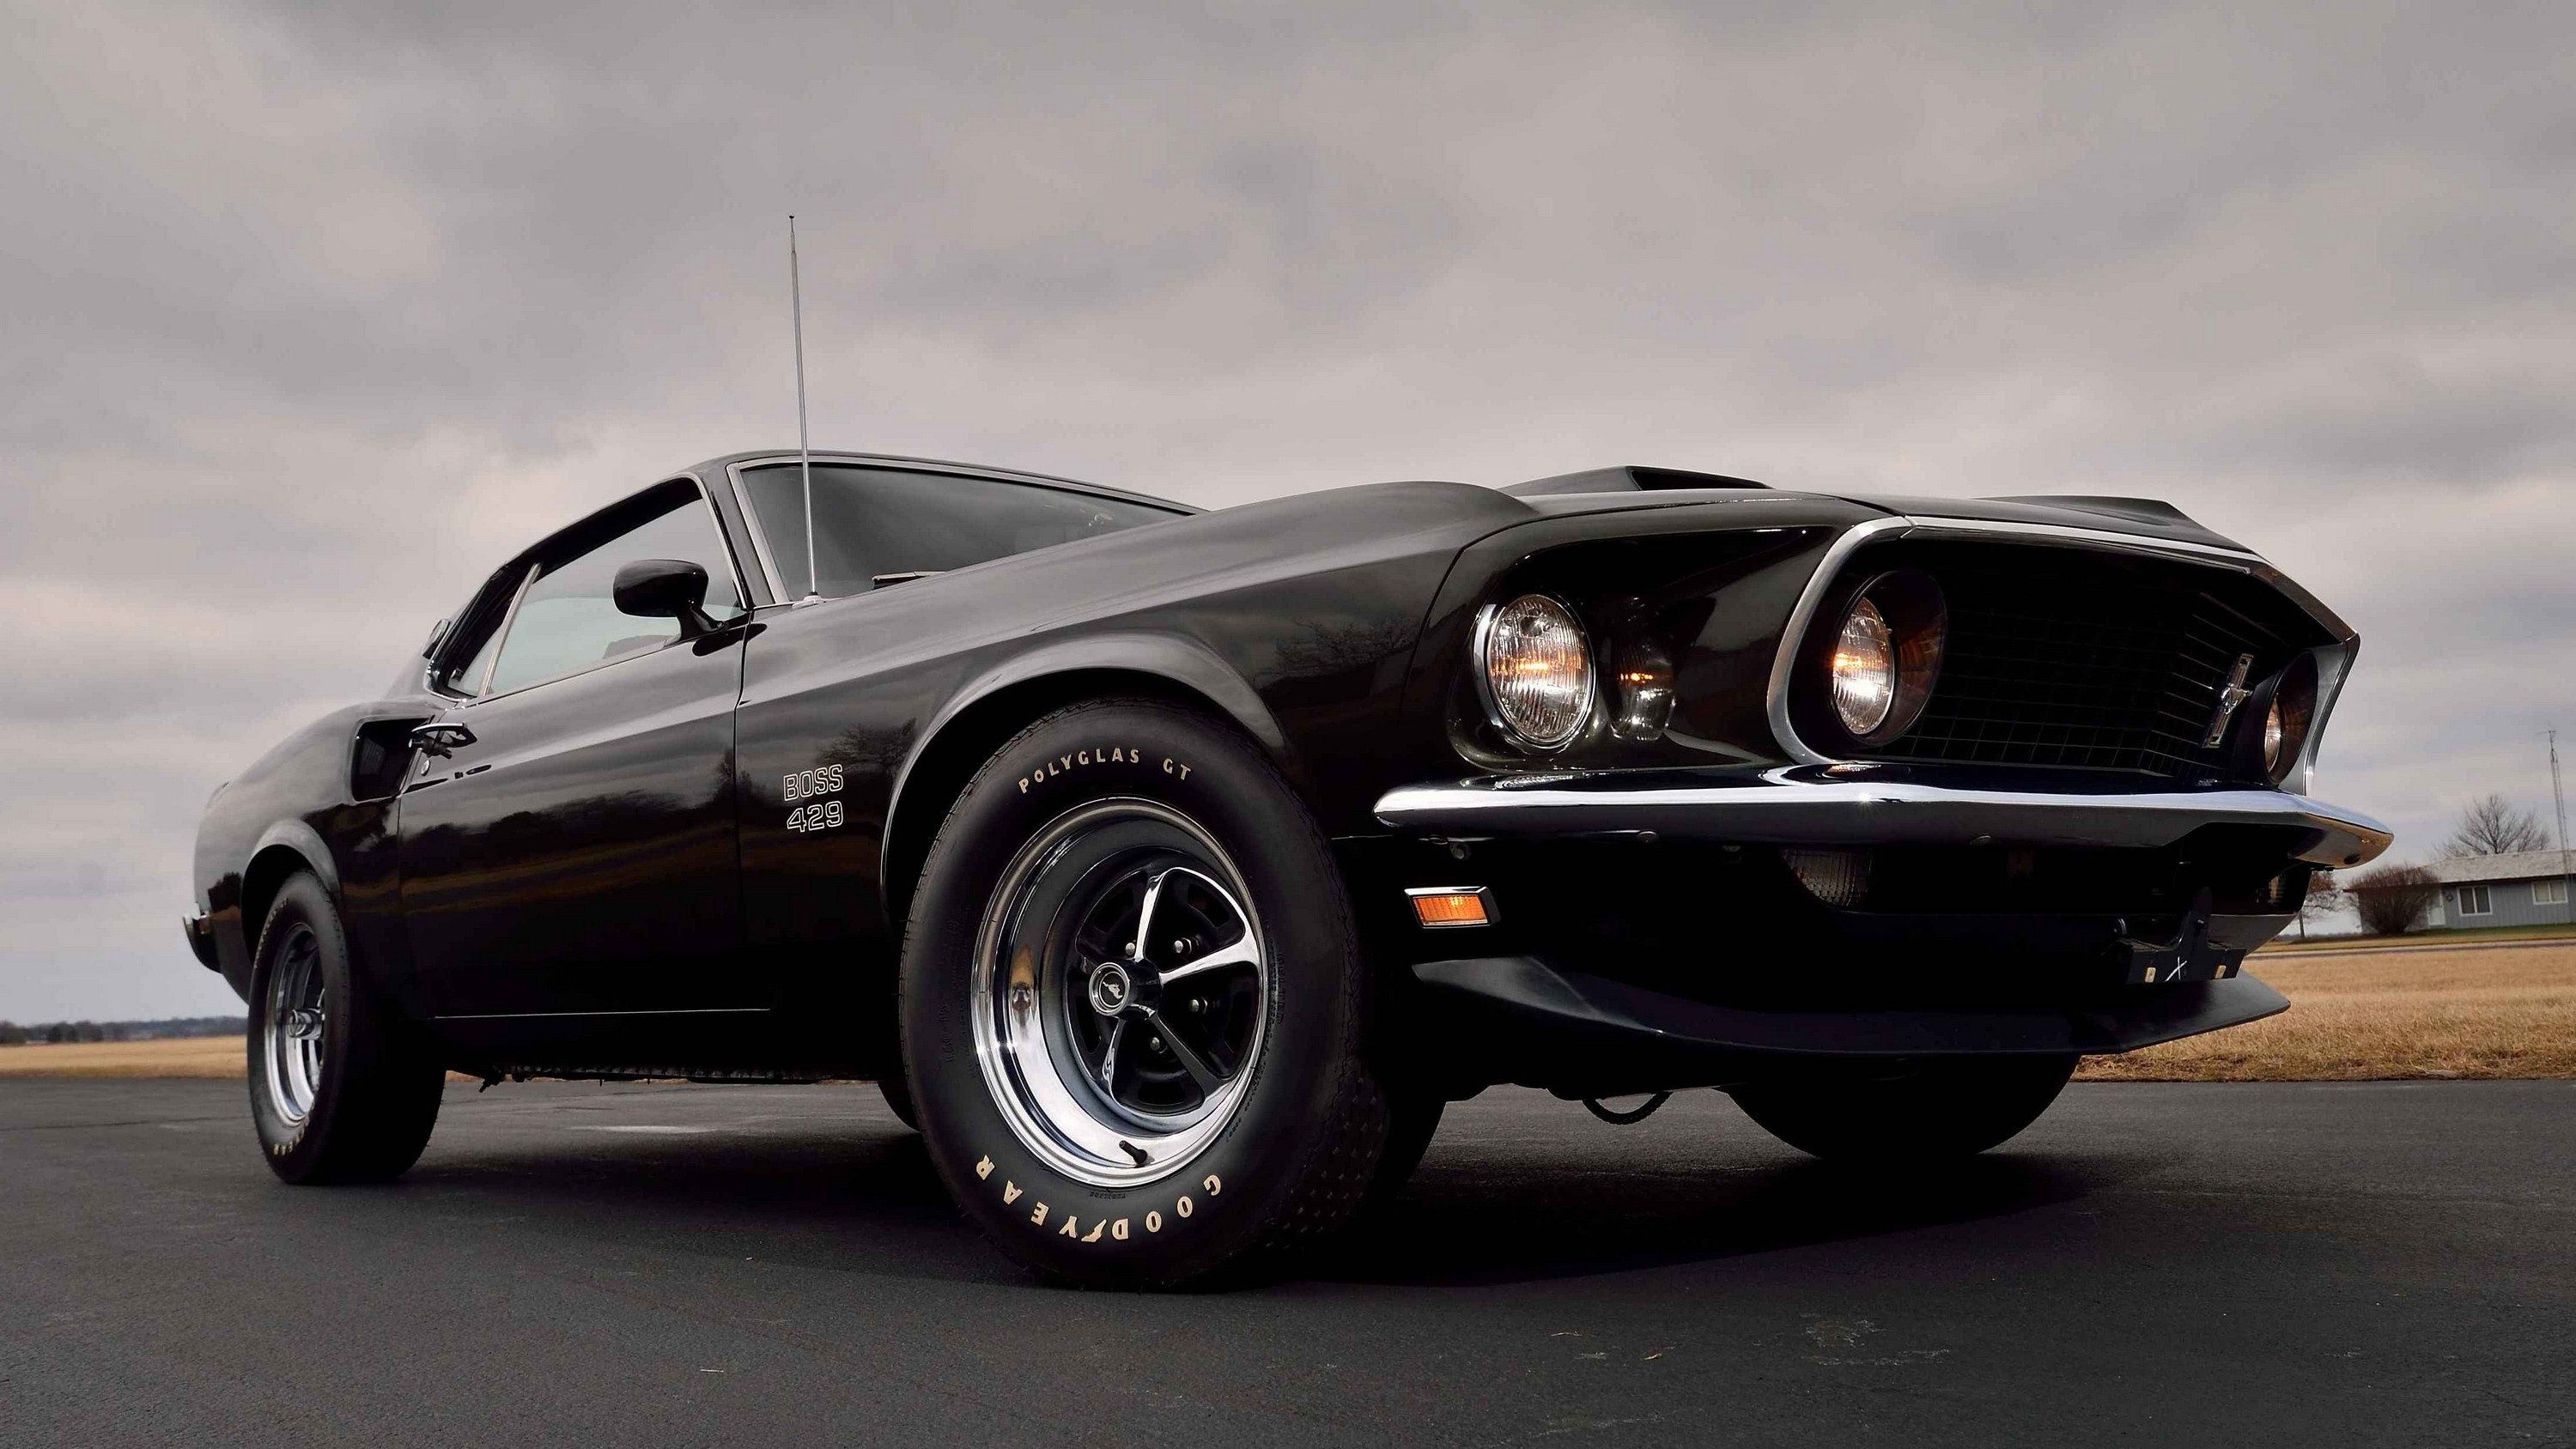 1969 Ford Mustang, Retro cool, Machine of dreams, Bold styling, Muscle car heyday, 3000x1690 HD Desktop